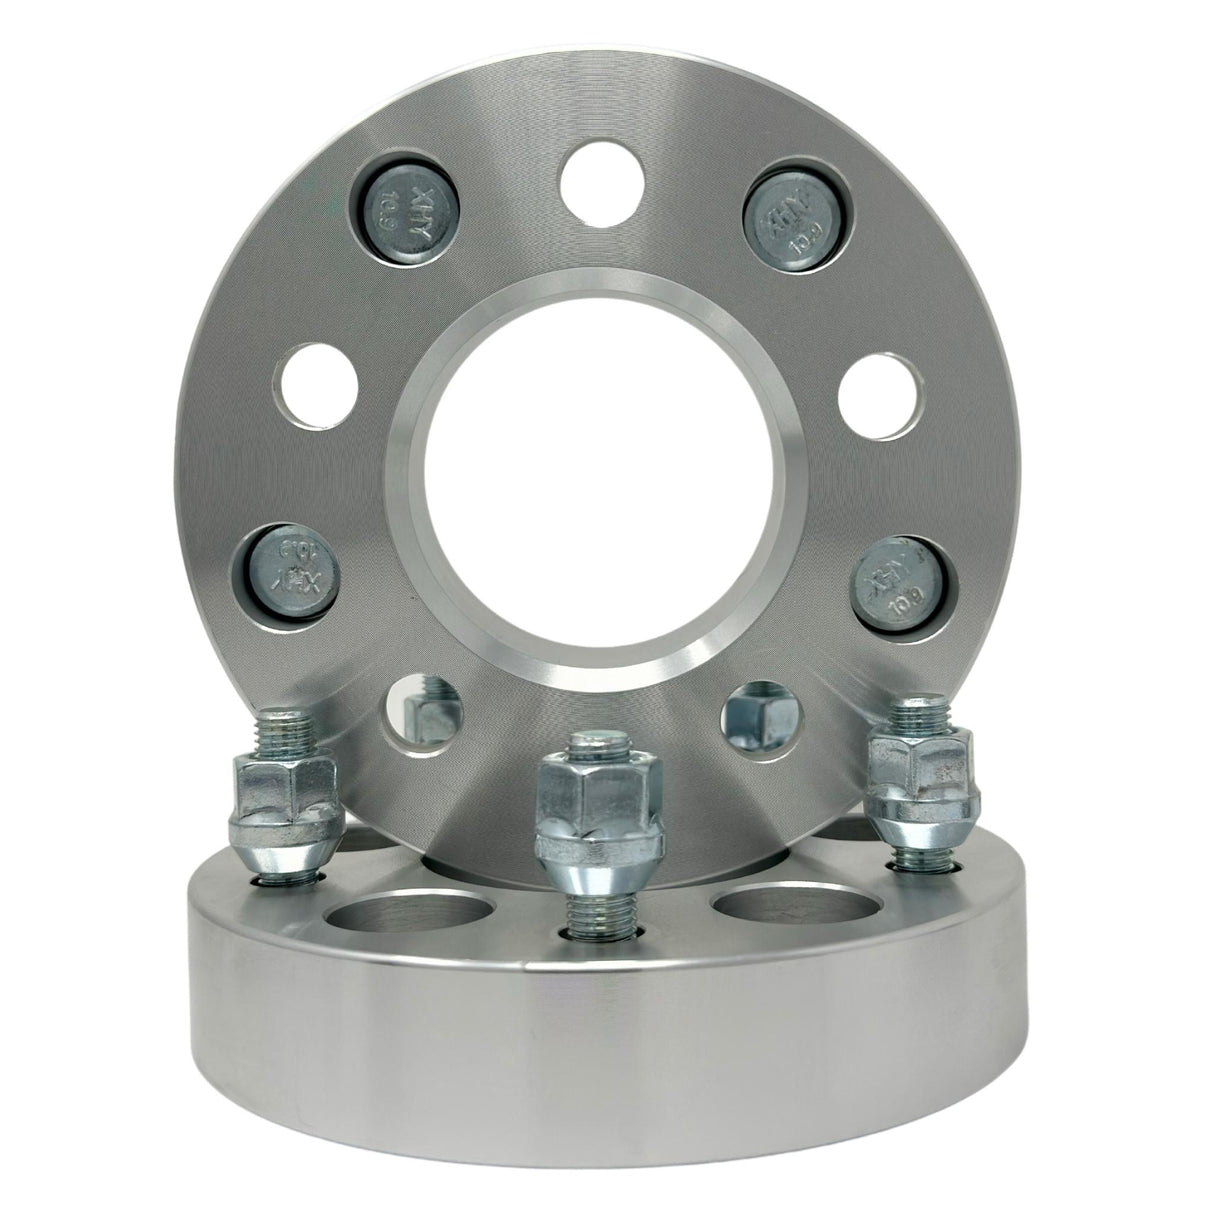 5x4.75 to 5x4.5 Wheel Adapters 1" - 1.25" Inch (25-32mm) 12x1.5 Studs & Lug Nuts 74mm Center Bore | 5x120.7 to 5x114.3